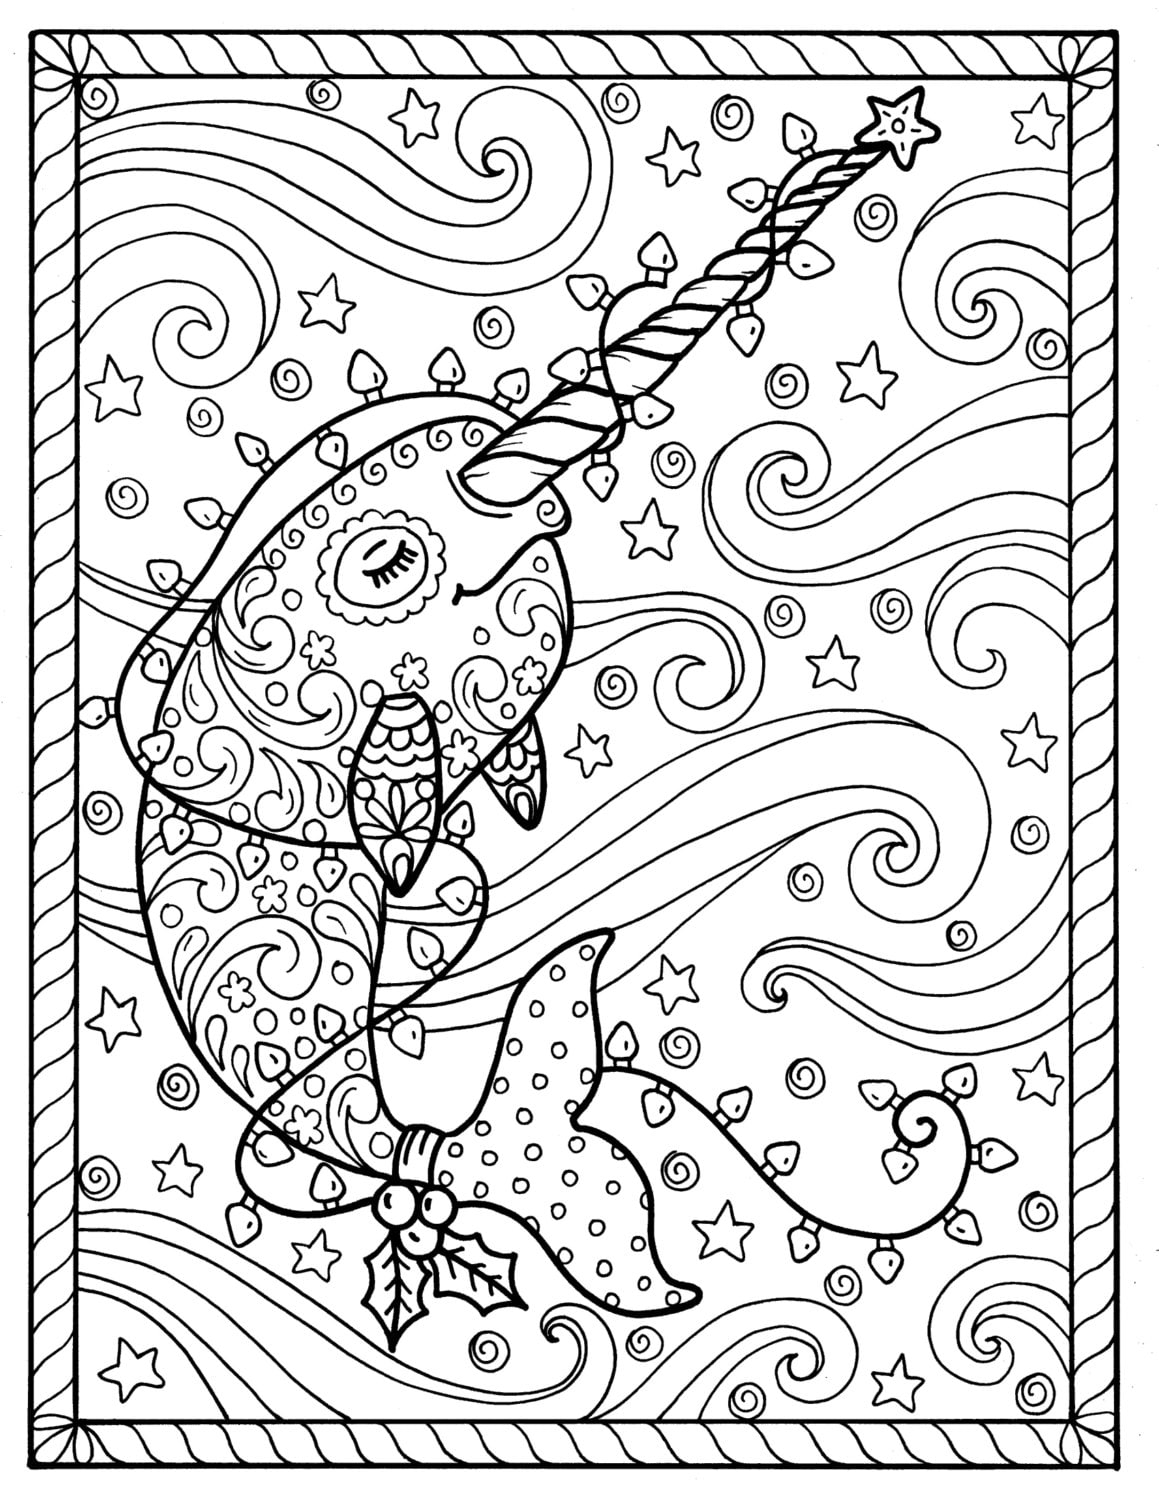 Narwhal Christmas Coloring Pages Adult Coloring Books Digi - Etsy Denmark